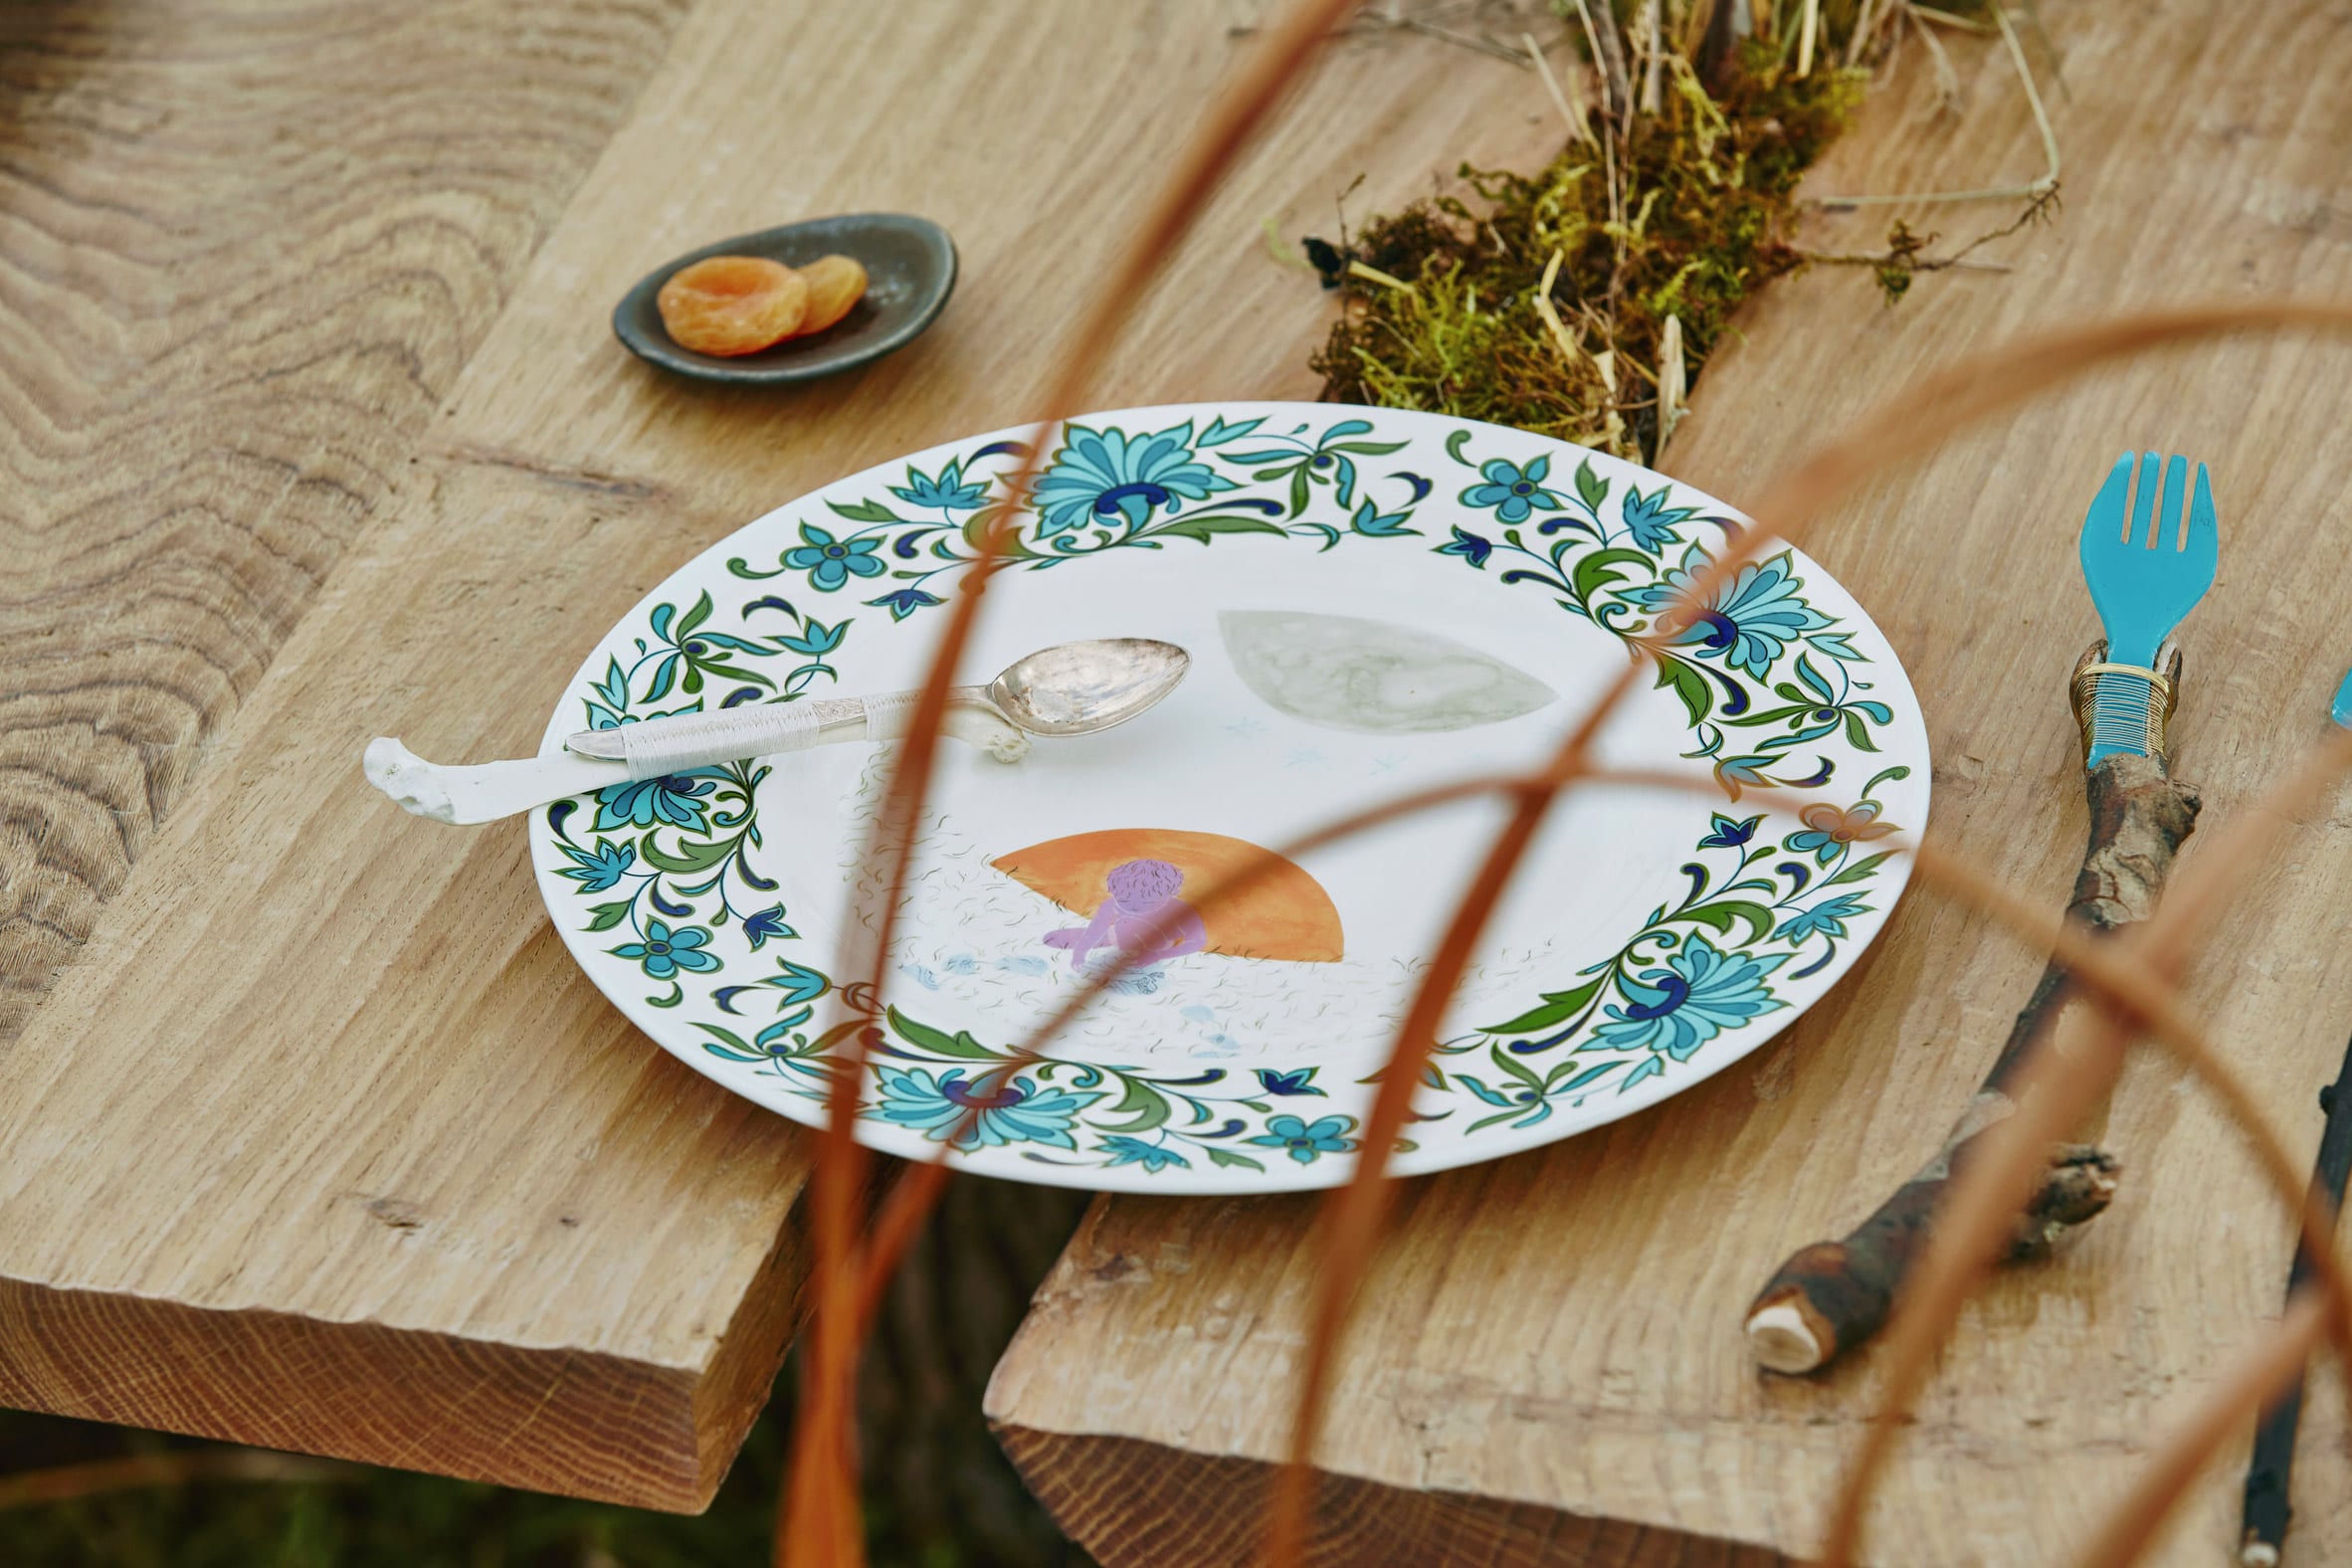 Close-up of table setting with illustrated ceramic plate in Venice Architecture Biennale installation by Superflux